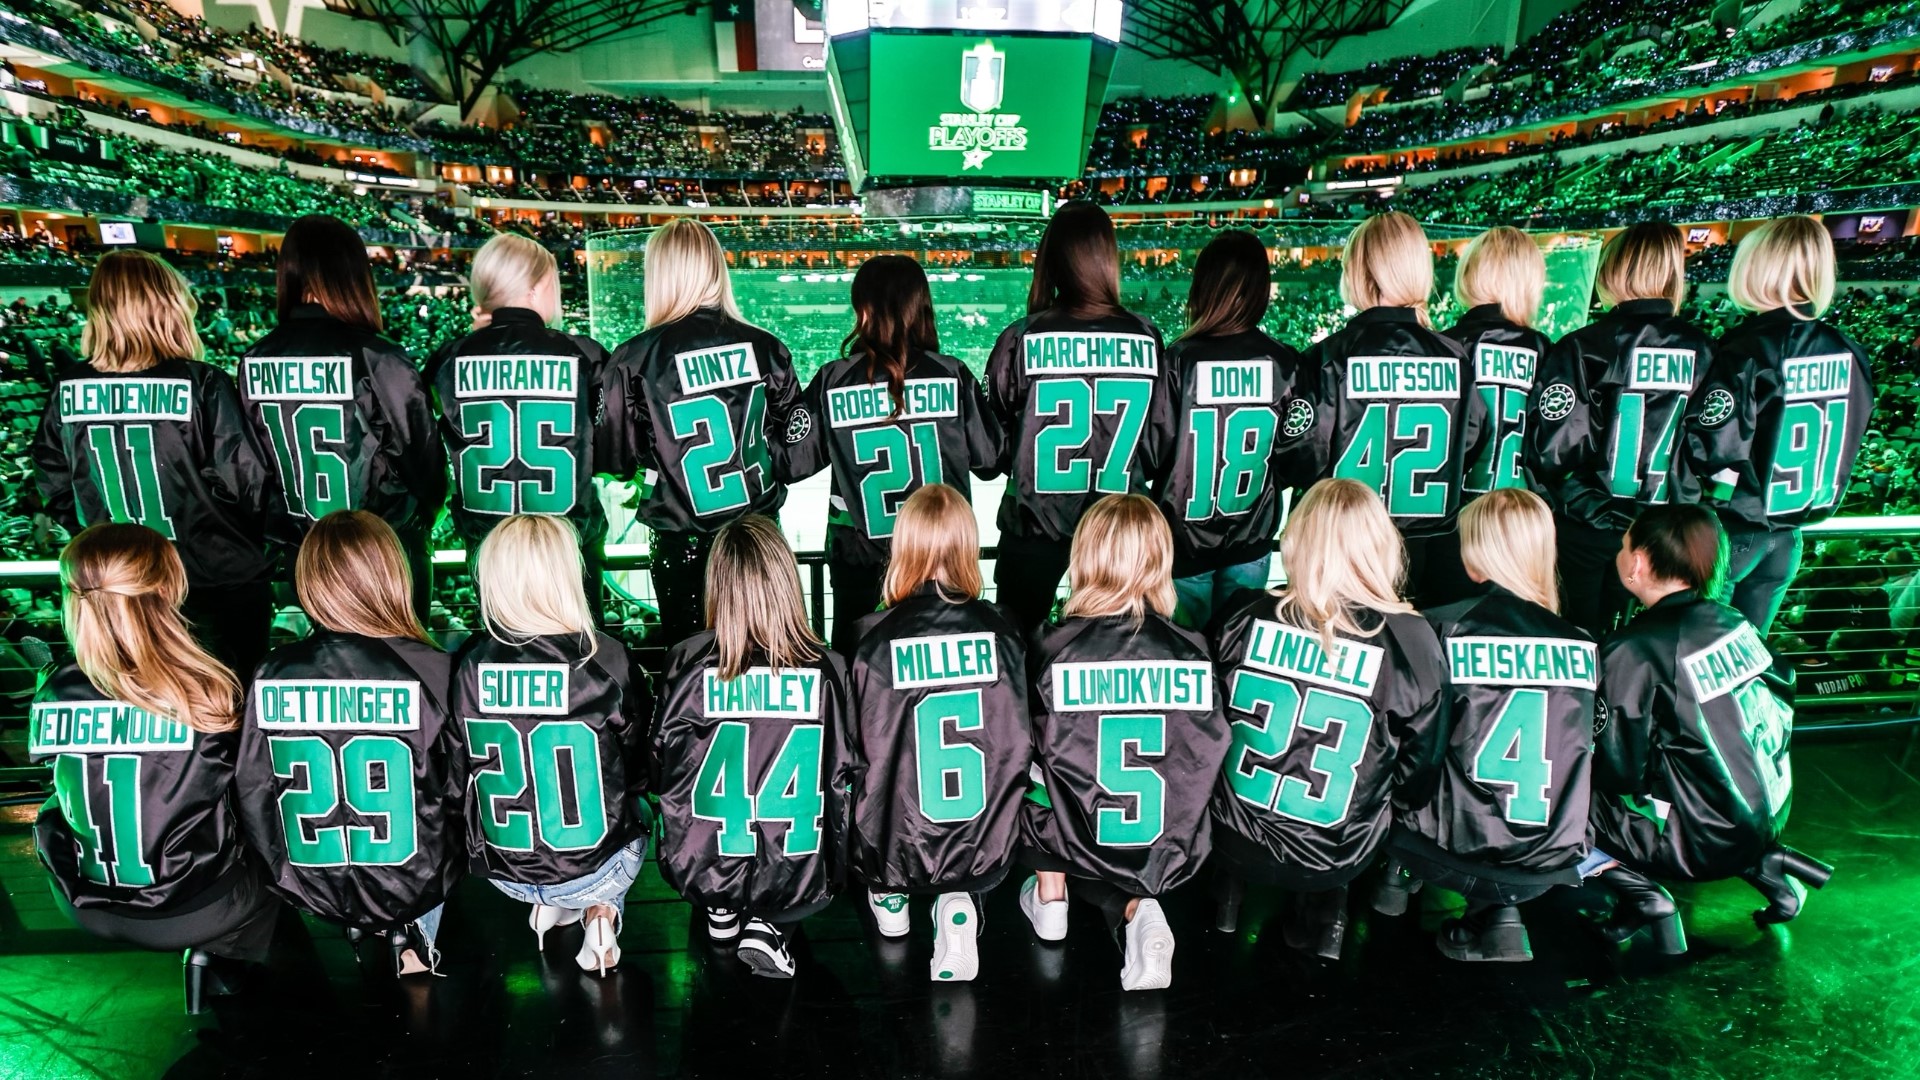 Dallas Stars Wives, girlfriends wear special outfits for support